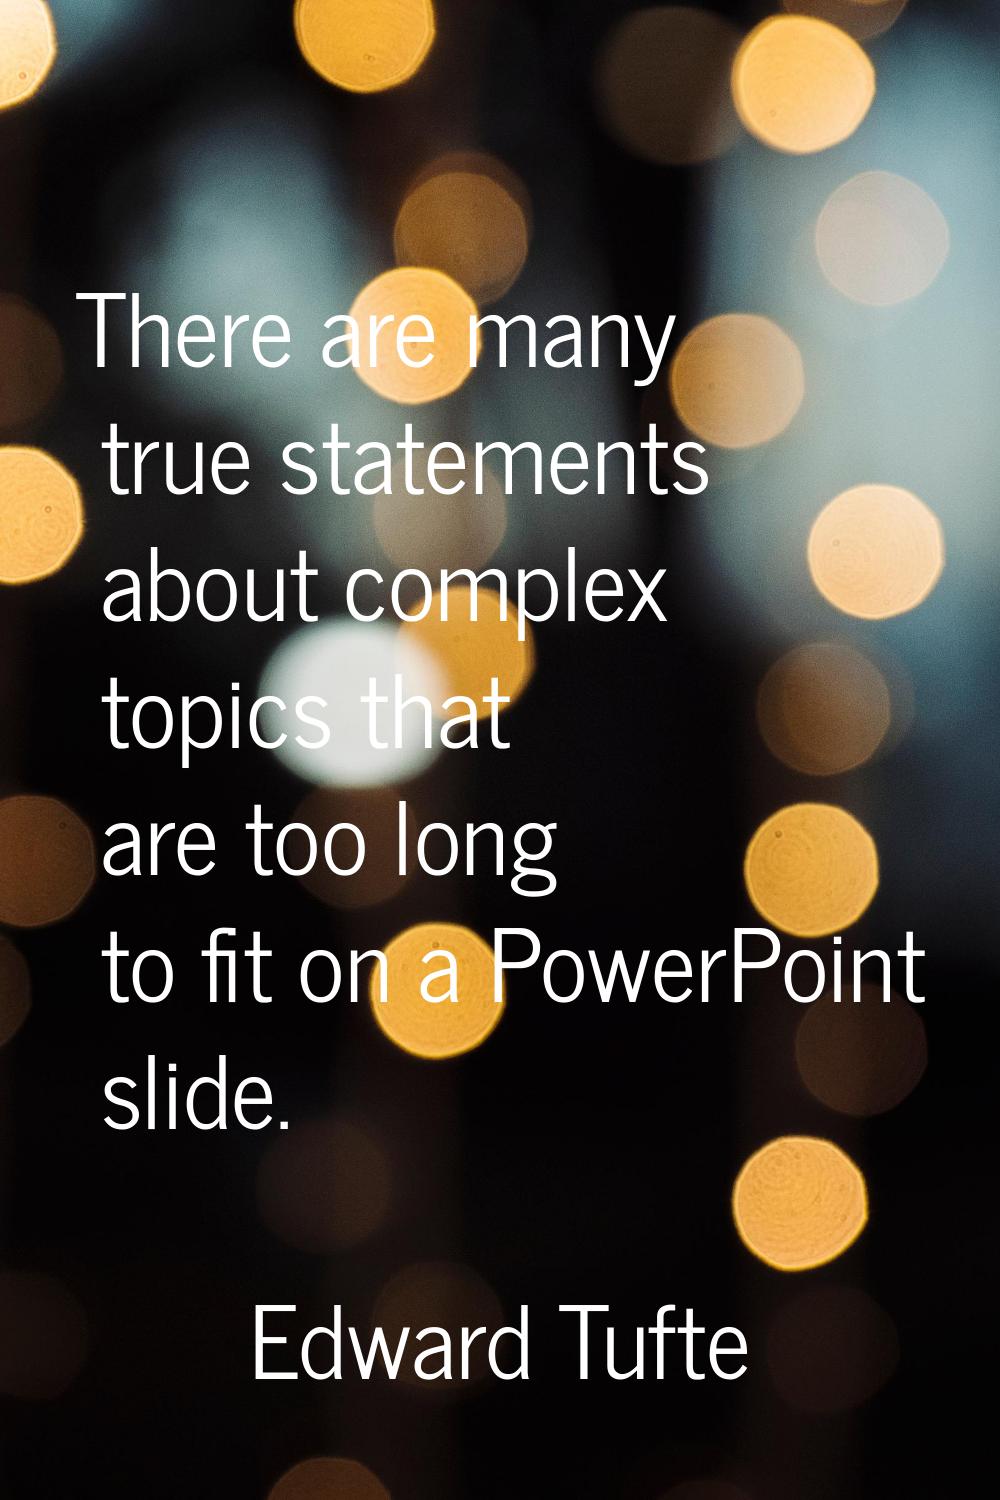 There are many true statements about complex topics that are too long to fit on a PowerPoint slide.